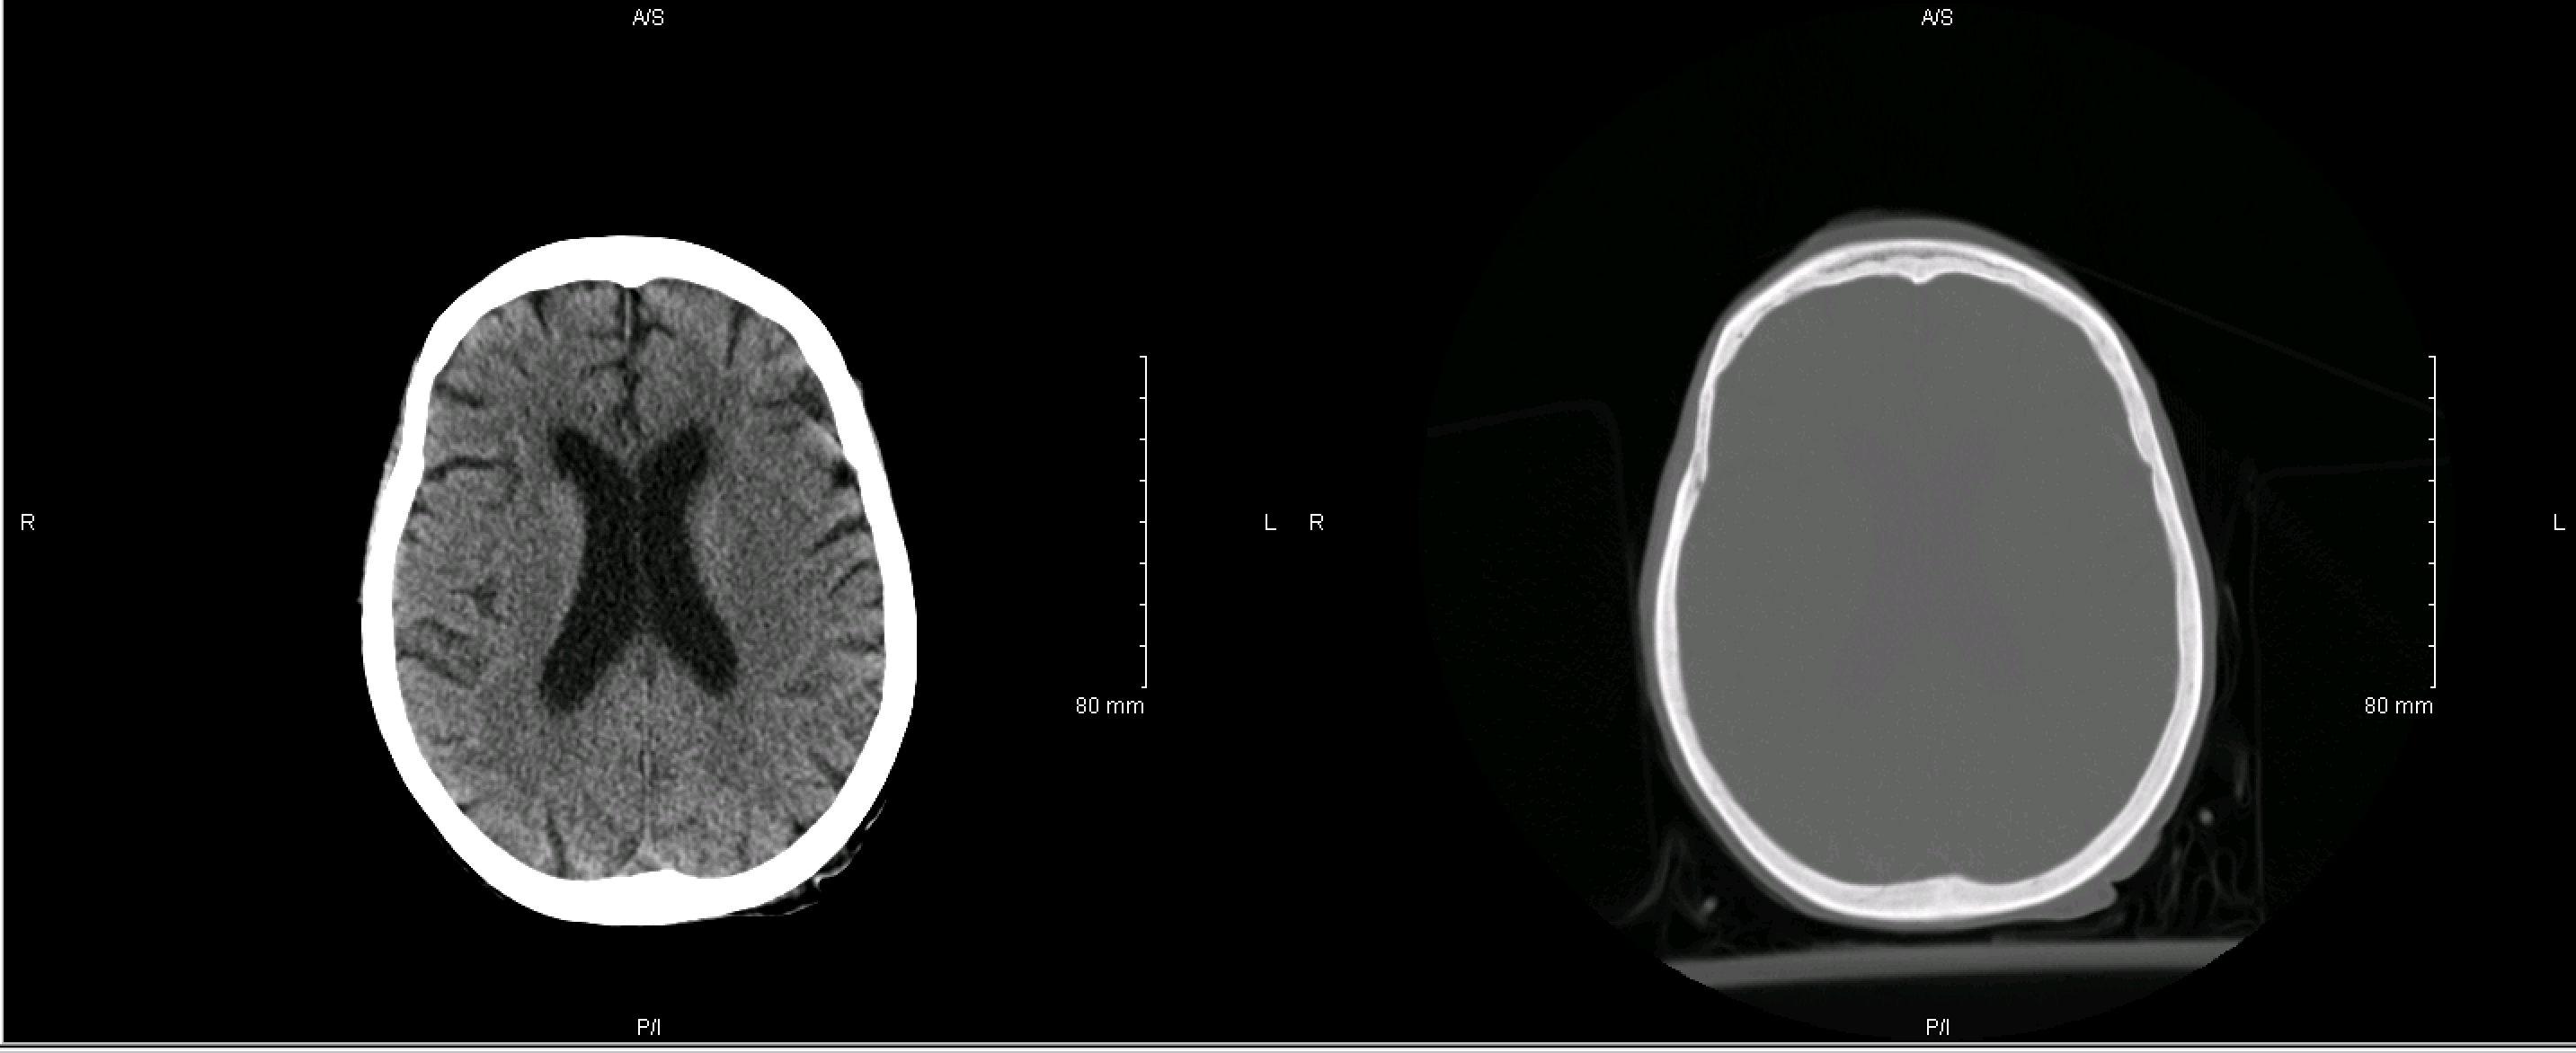 These are axial sections of a non-contrast head CT scan. The pane on the left is the BRAIN WINDOW and the pane on the right is the BONE WINDOW. One can appreciate how these different windows help with analyzing the brain and bone respectively (source)